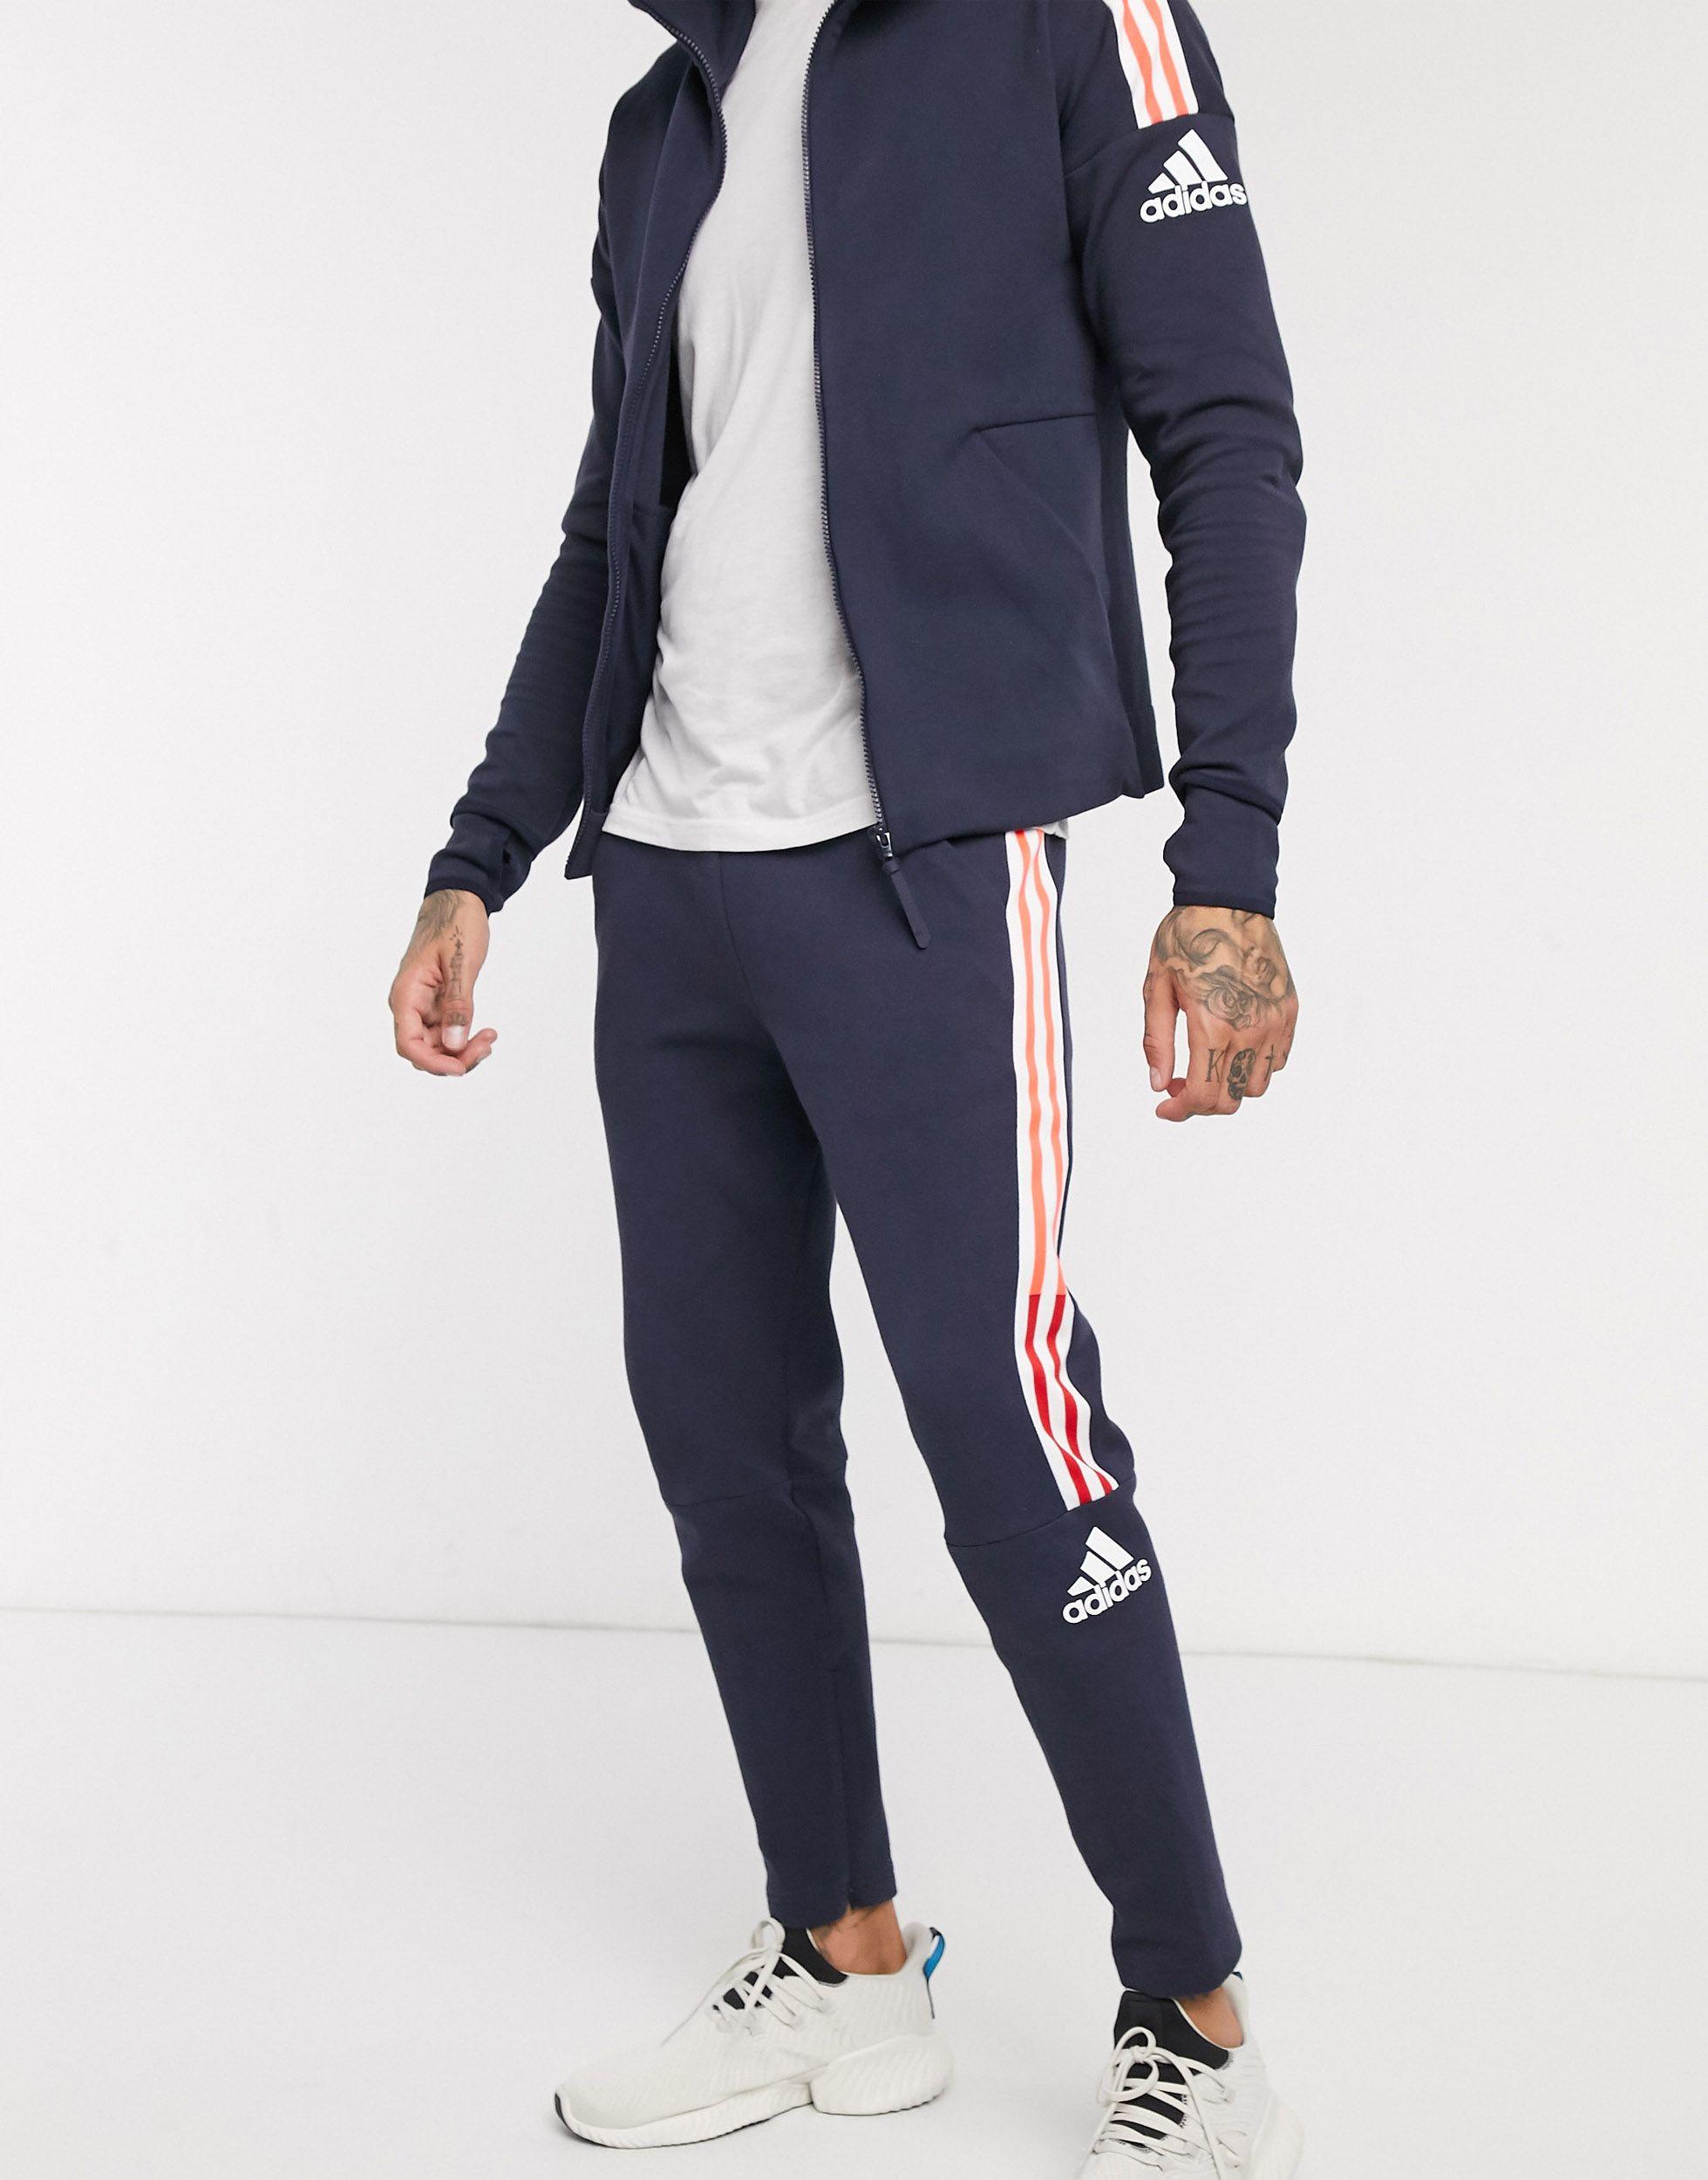 Adidas Originals Cotton Adidas Zne 3 Stripe Joggers In Navy Blue For Men Lyst